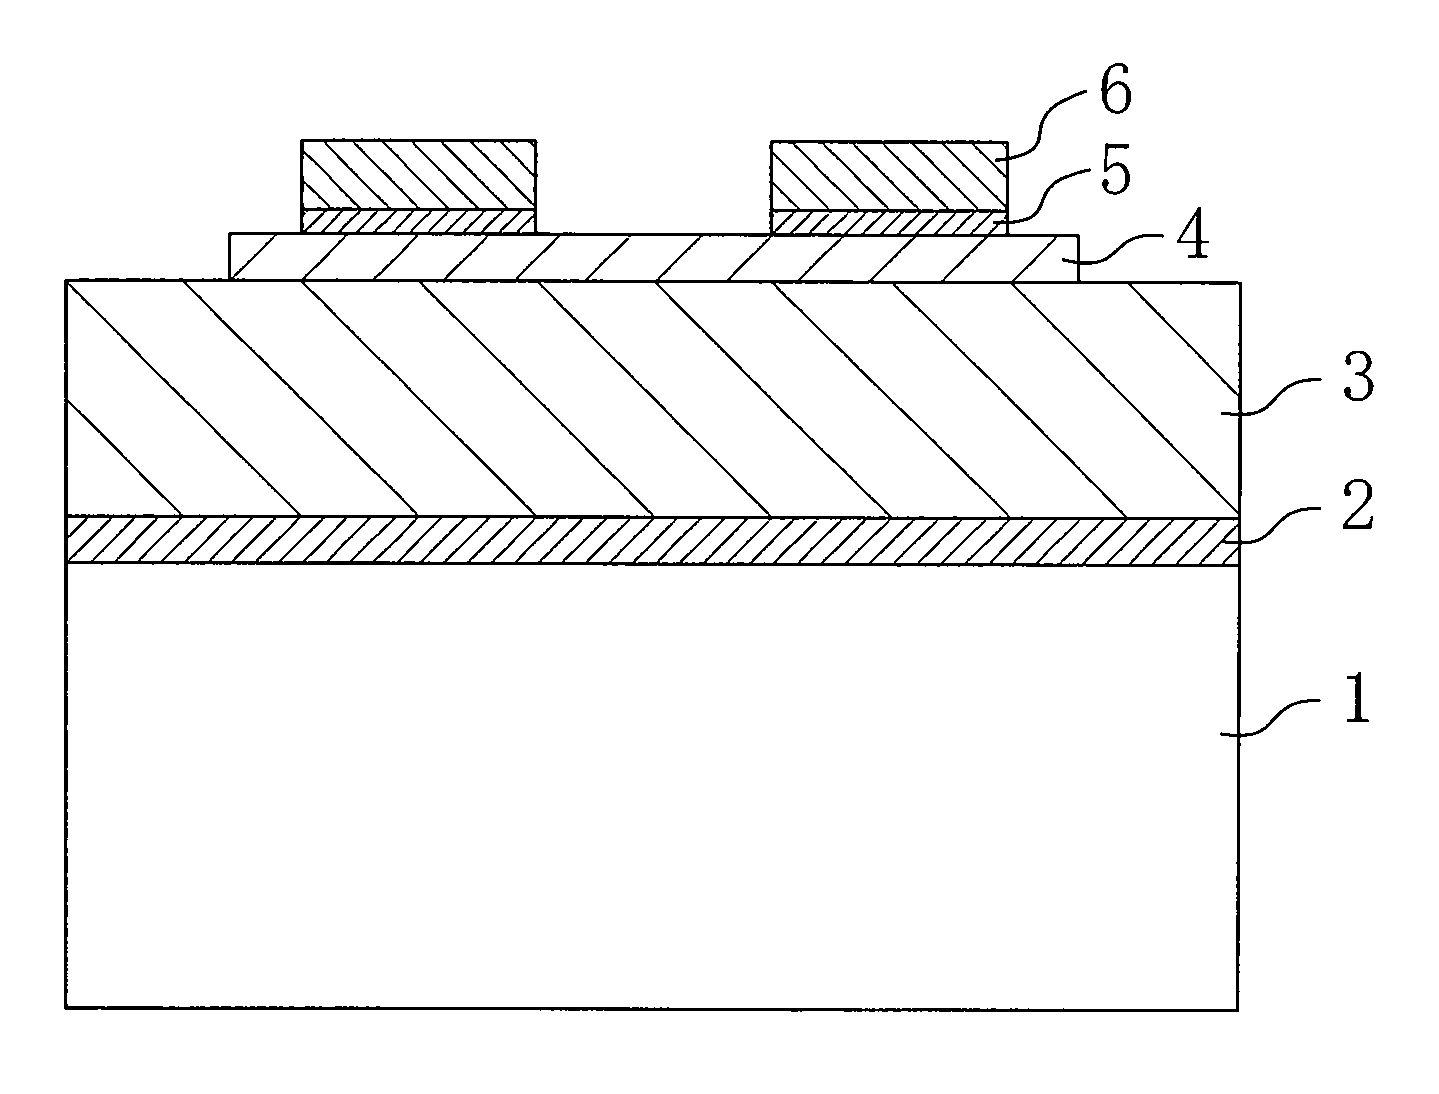 Semiconductor memory device including a semiconductor film made of a material having a spontaneous polarization and method for fabricating the same